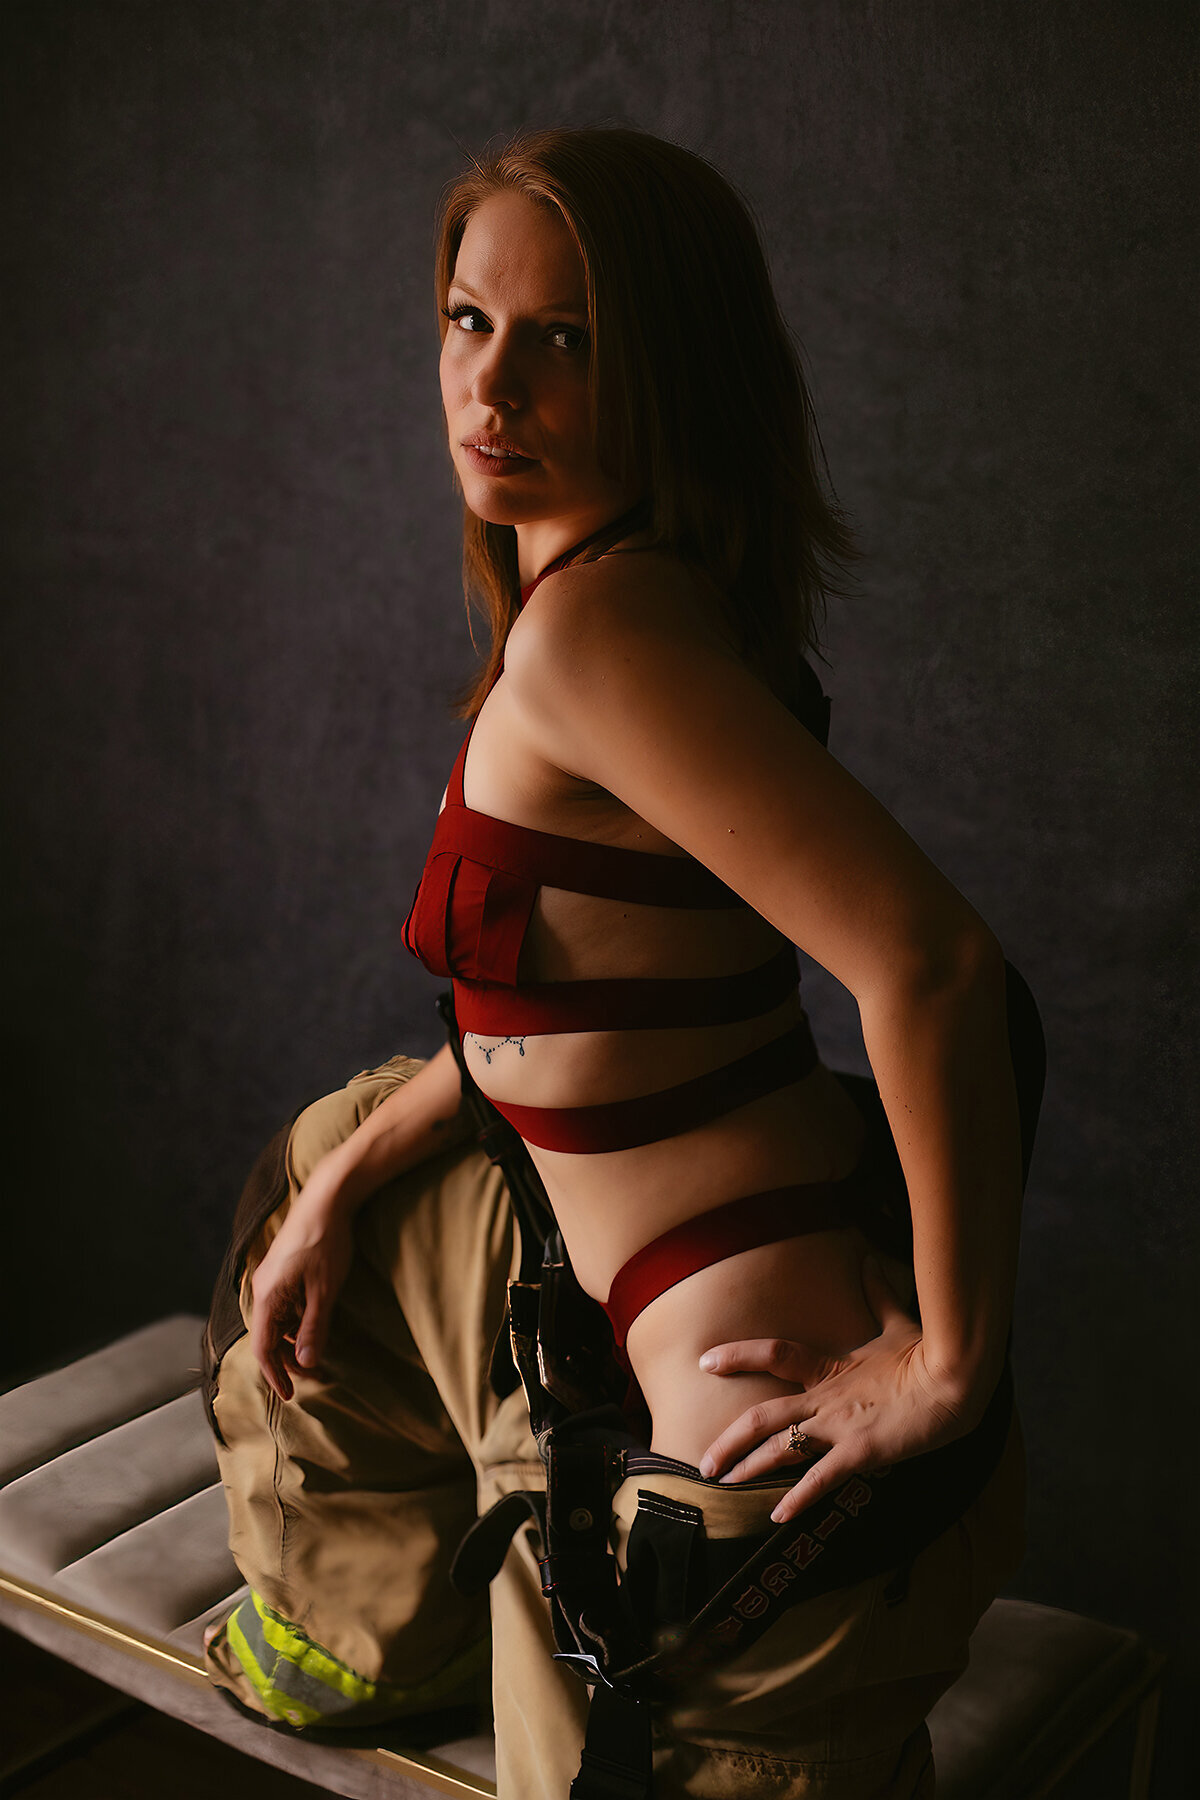 A woman in strappy red lingerie poses while wearing fireman gear during a Bentonville boudoir photoshoot.